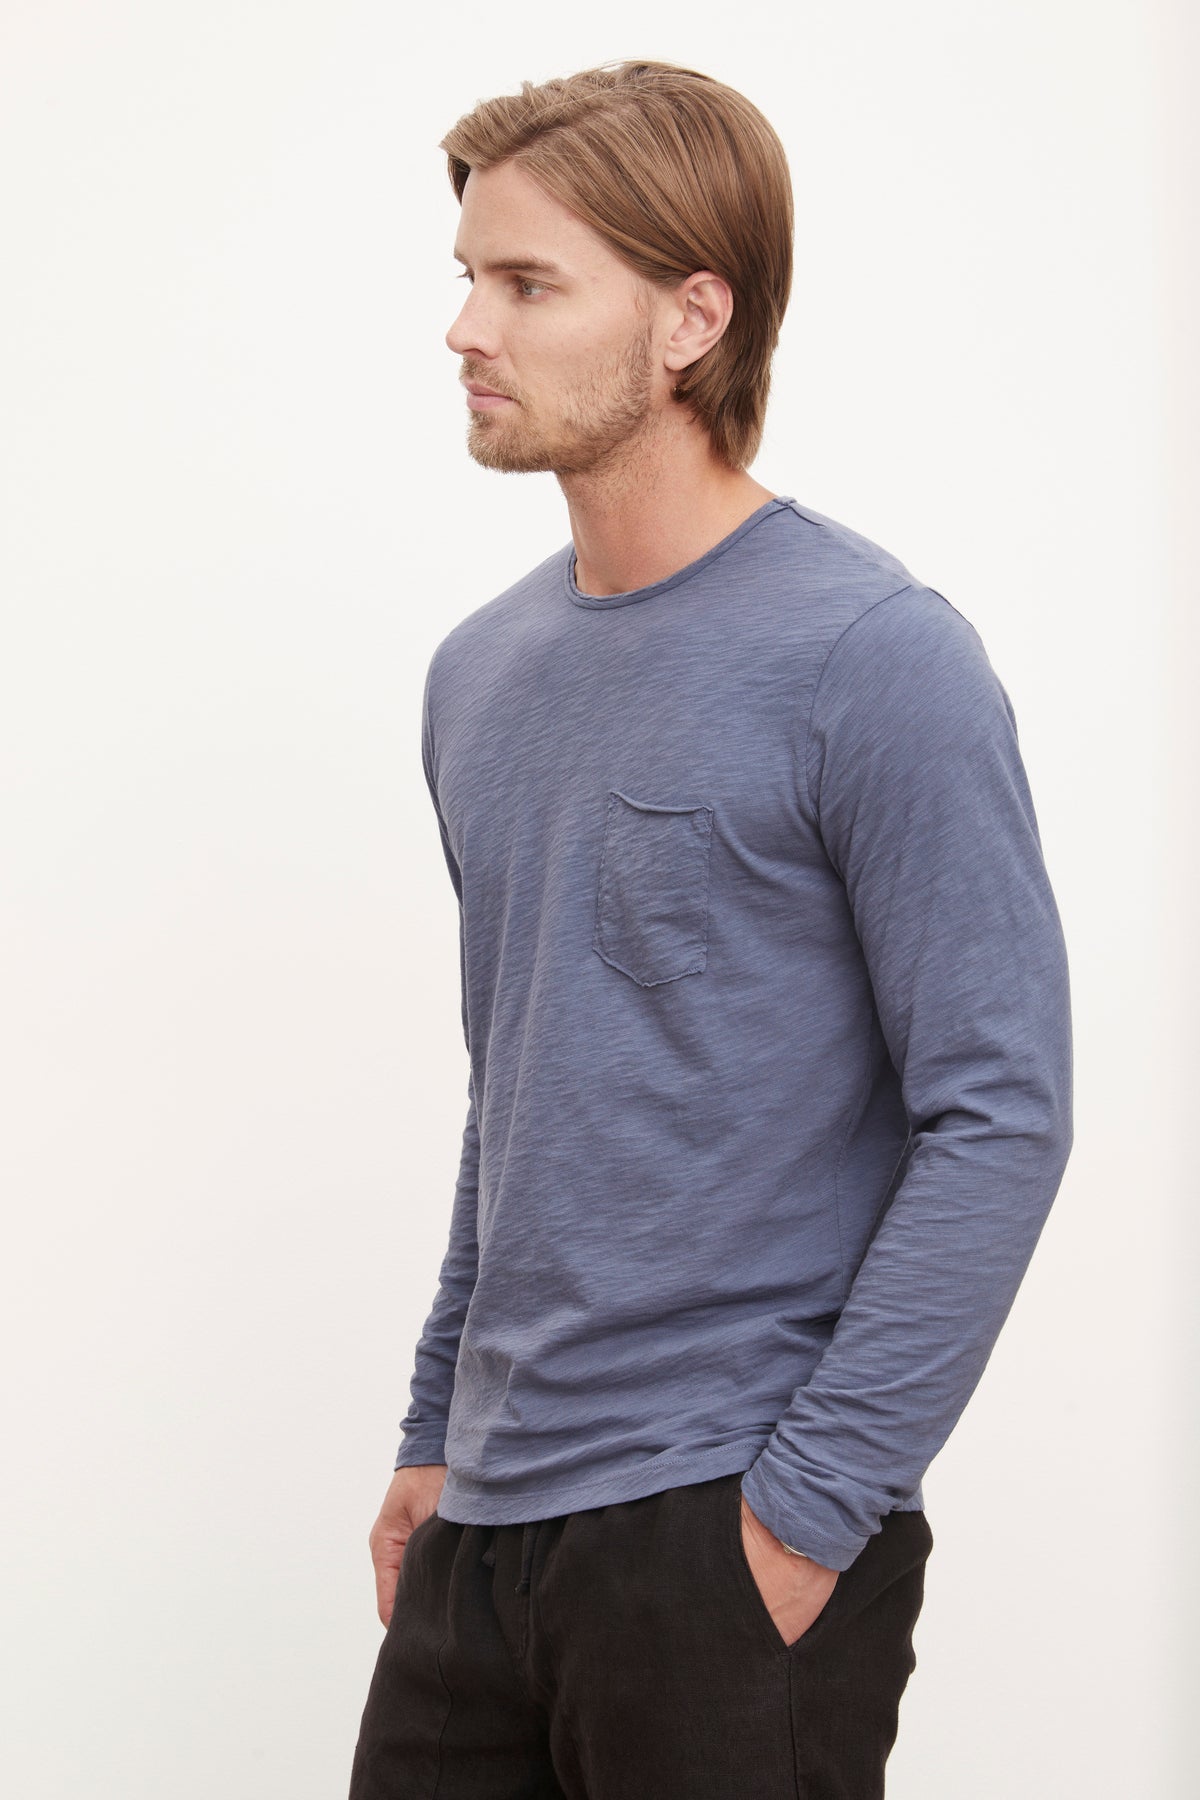   A man wearing a blue long sleeve SIMEON RAW EDGE COTTON SLUB TEE, made from soft slub cotton fabric and featuring raw-edge details on the sleeves by Velvet by Graham & Spencer. 